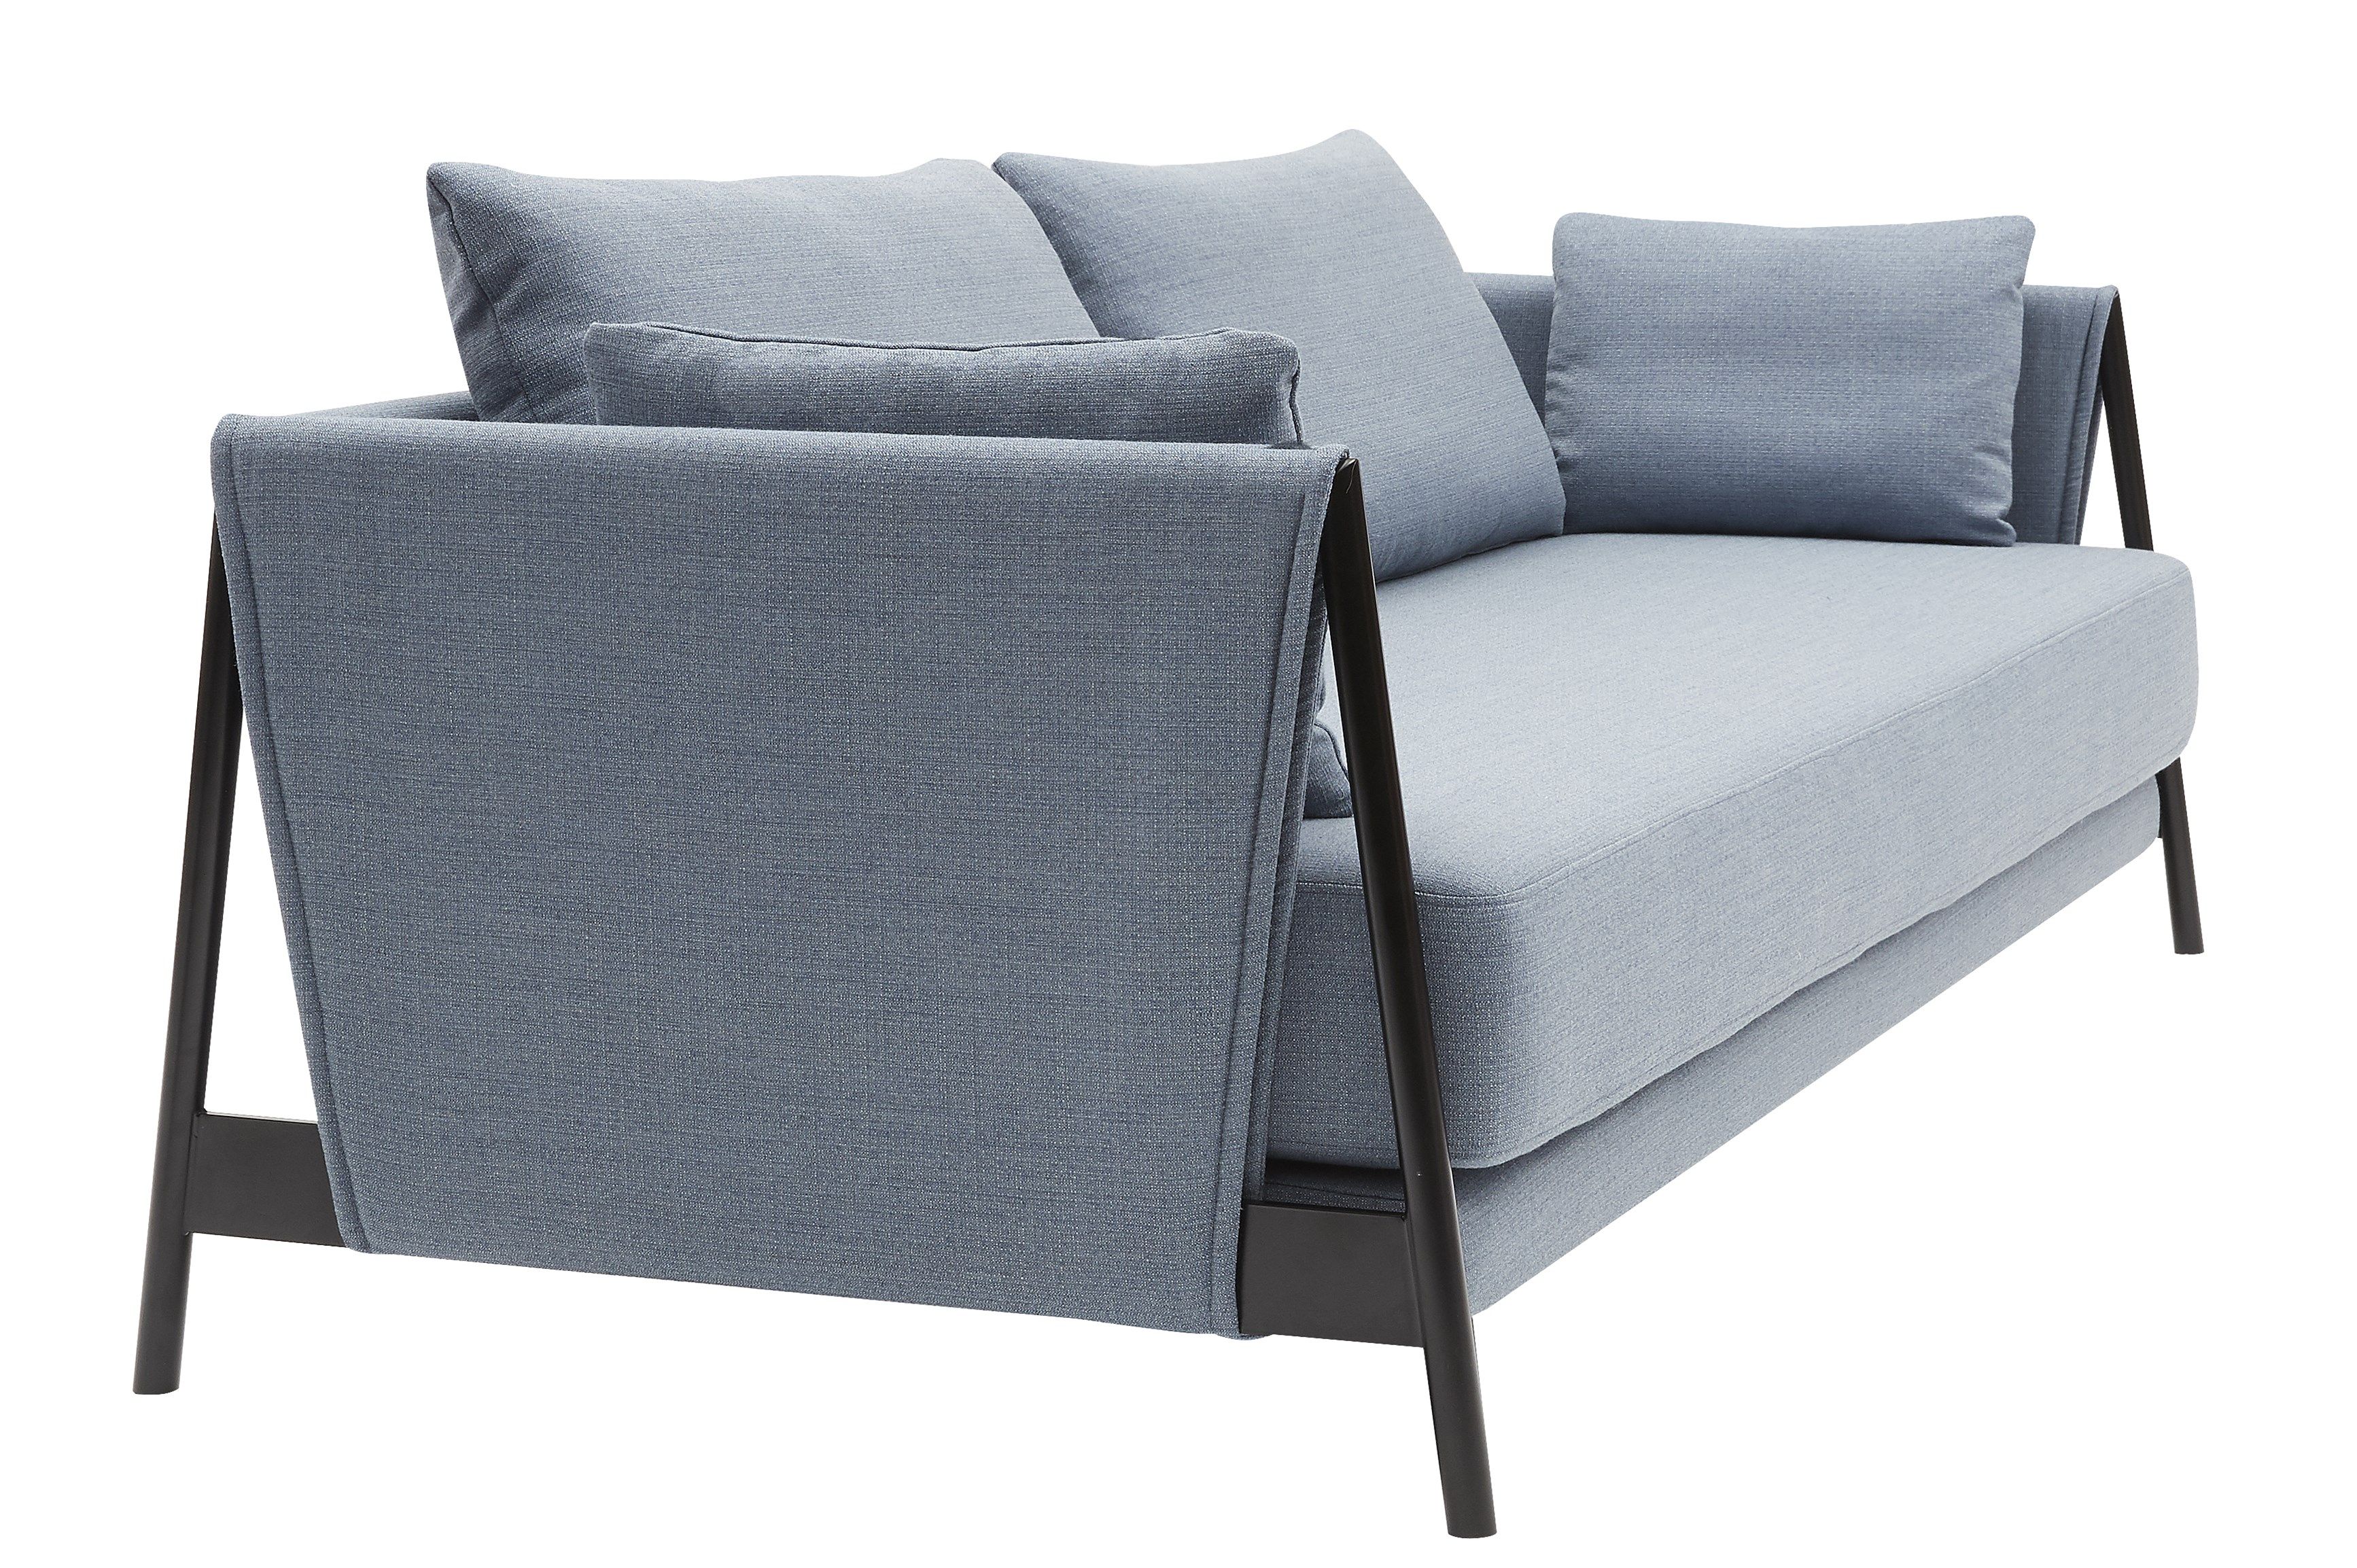 Sofa bed Madison by Softline